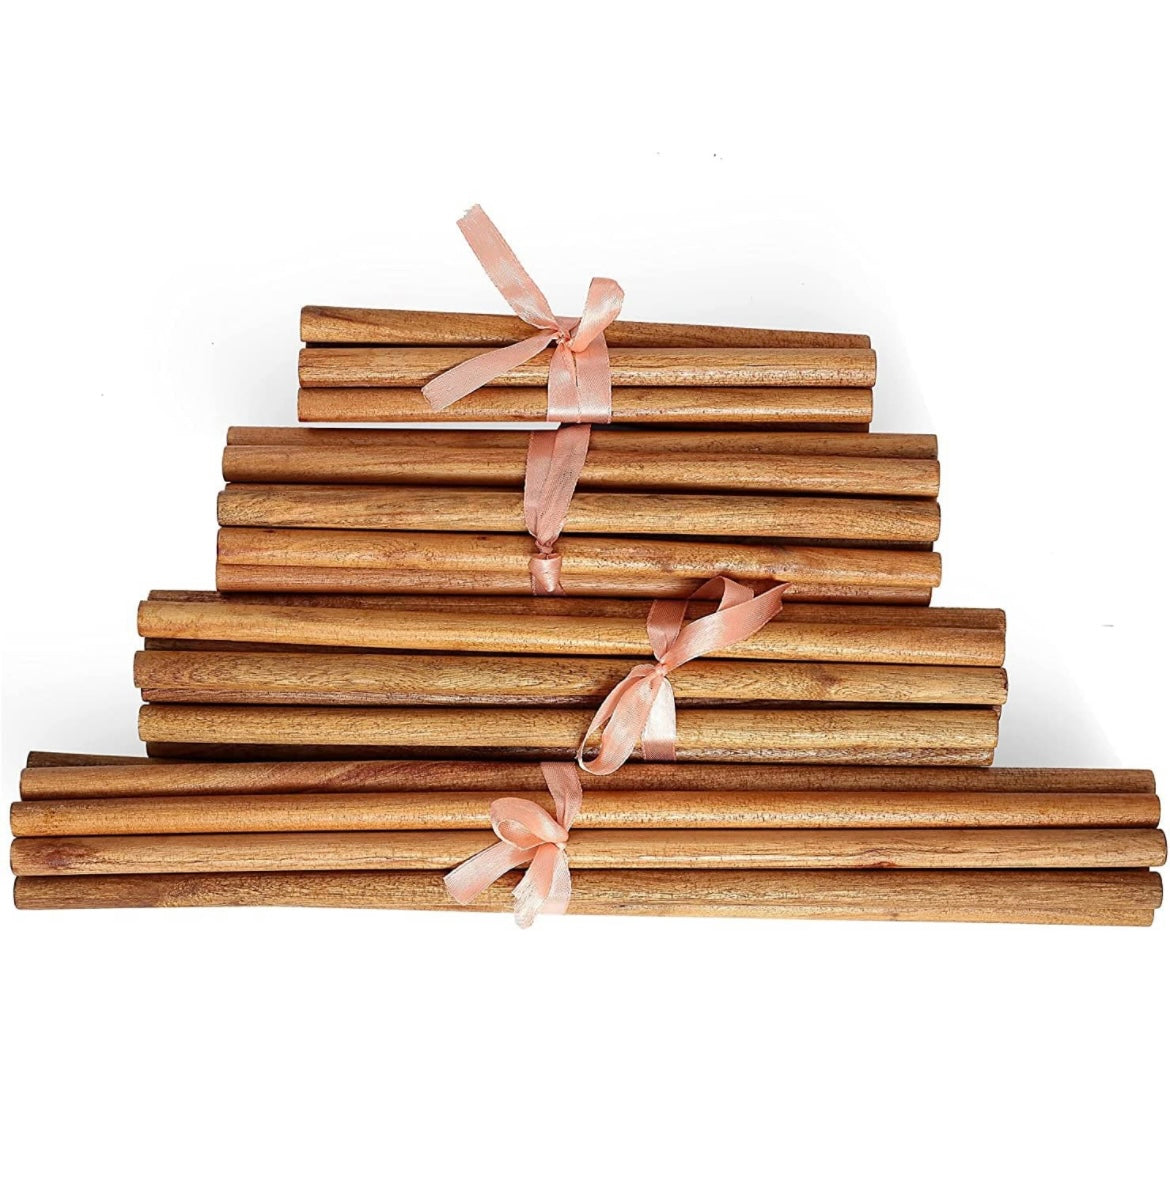 Buy Bloomax Hardwood Round Wooden Dowels Stick Rods, Wood Dowels